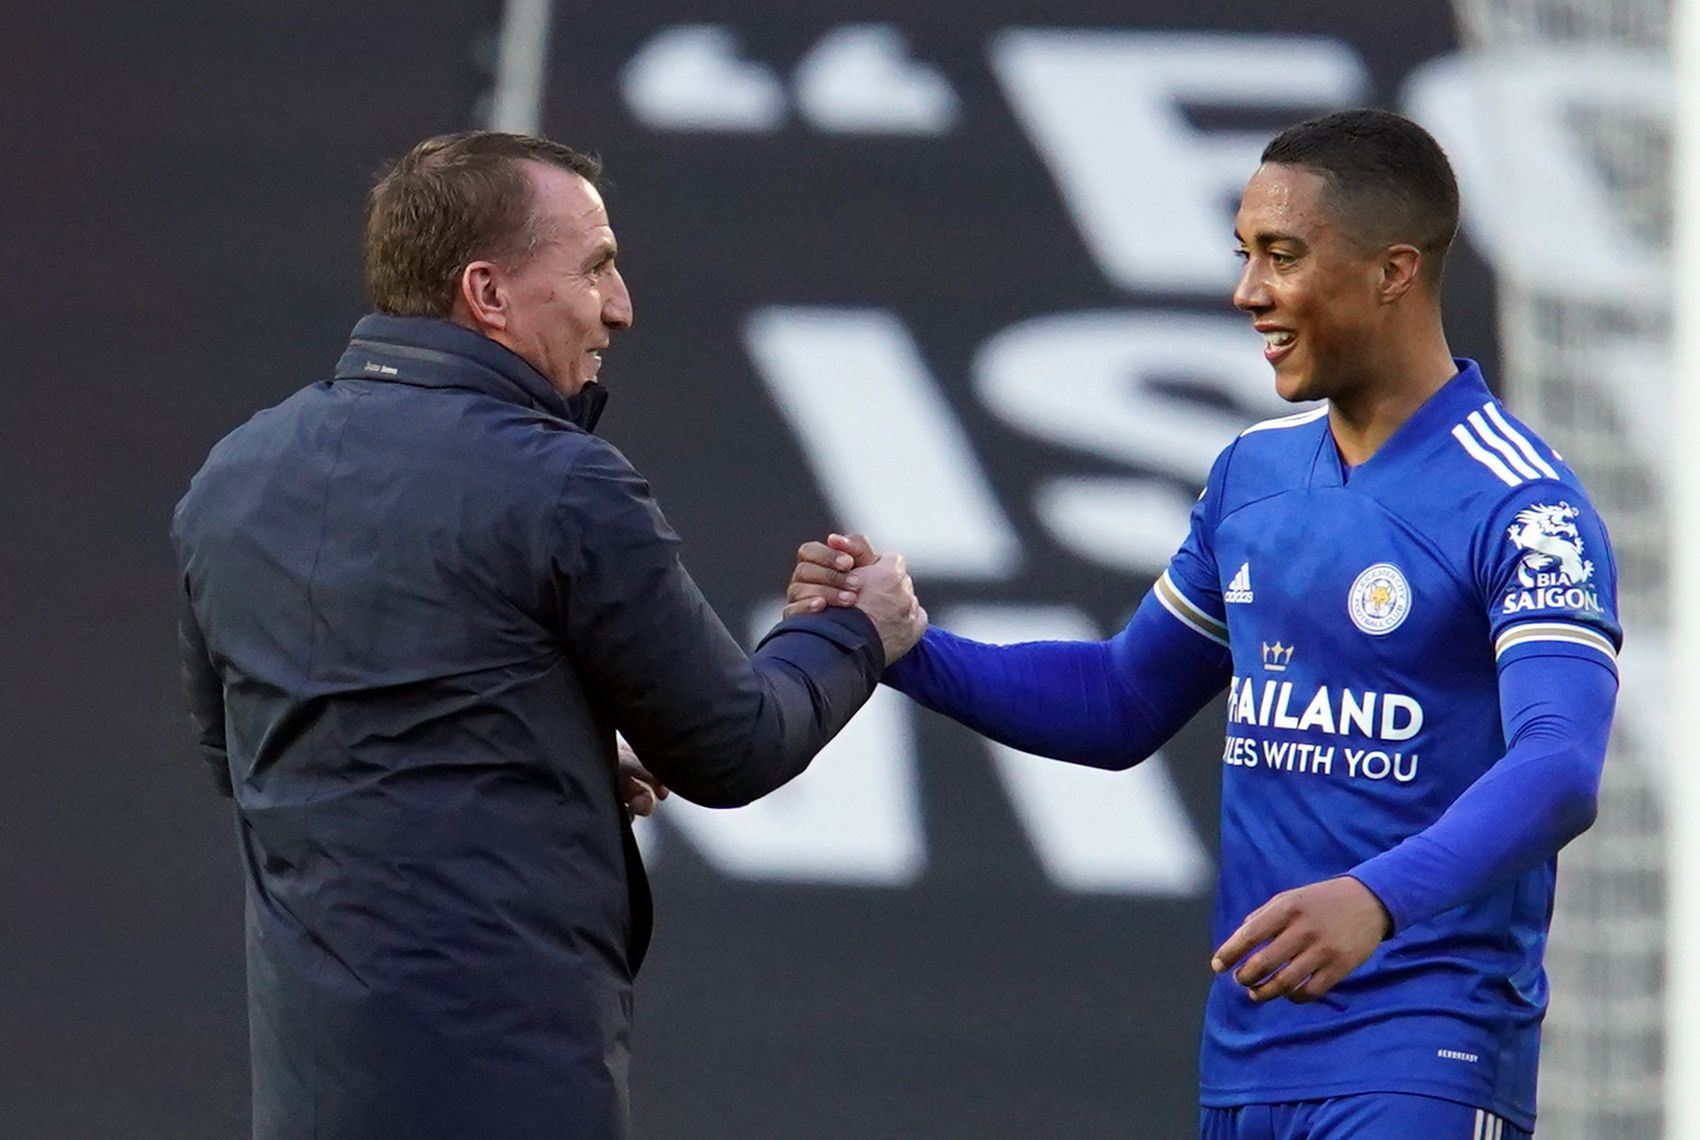 Soccer Football - Premier League - Manchester United v Leicester City - Old Trafford, Manchester, Britain - May 11, 2021 Leicester City's Youri Tielemans celebrate with manager Brendan Rodgers after the match Pool via REUTERS/Dave Thompson EDITORIAL USE ONLY. No use with unauthorized audio, video, data, fixture lists, club/league logos or 'live' services. Online in-match use limited to 75 images, no video emulation. No use in betting, games or single club /league/player publications.  Please con